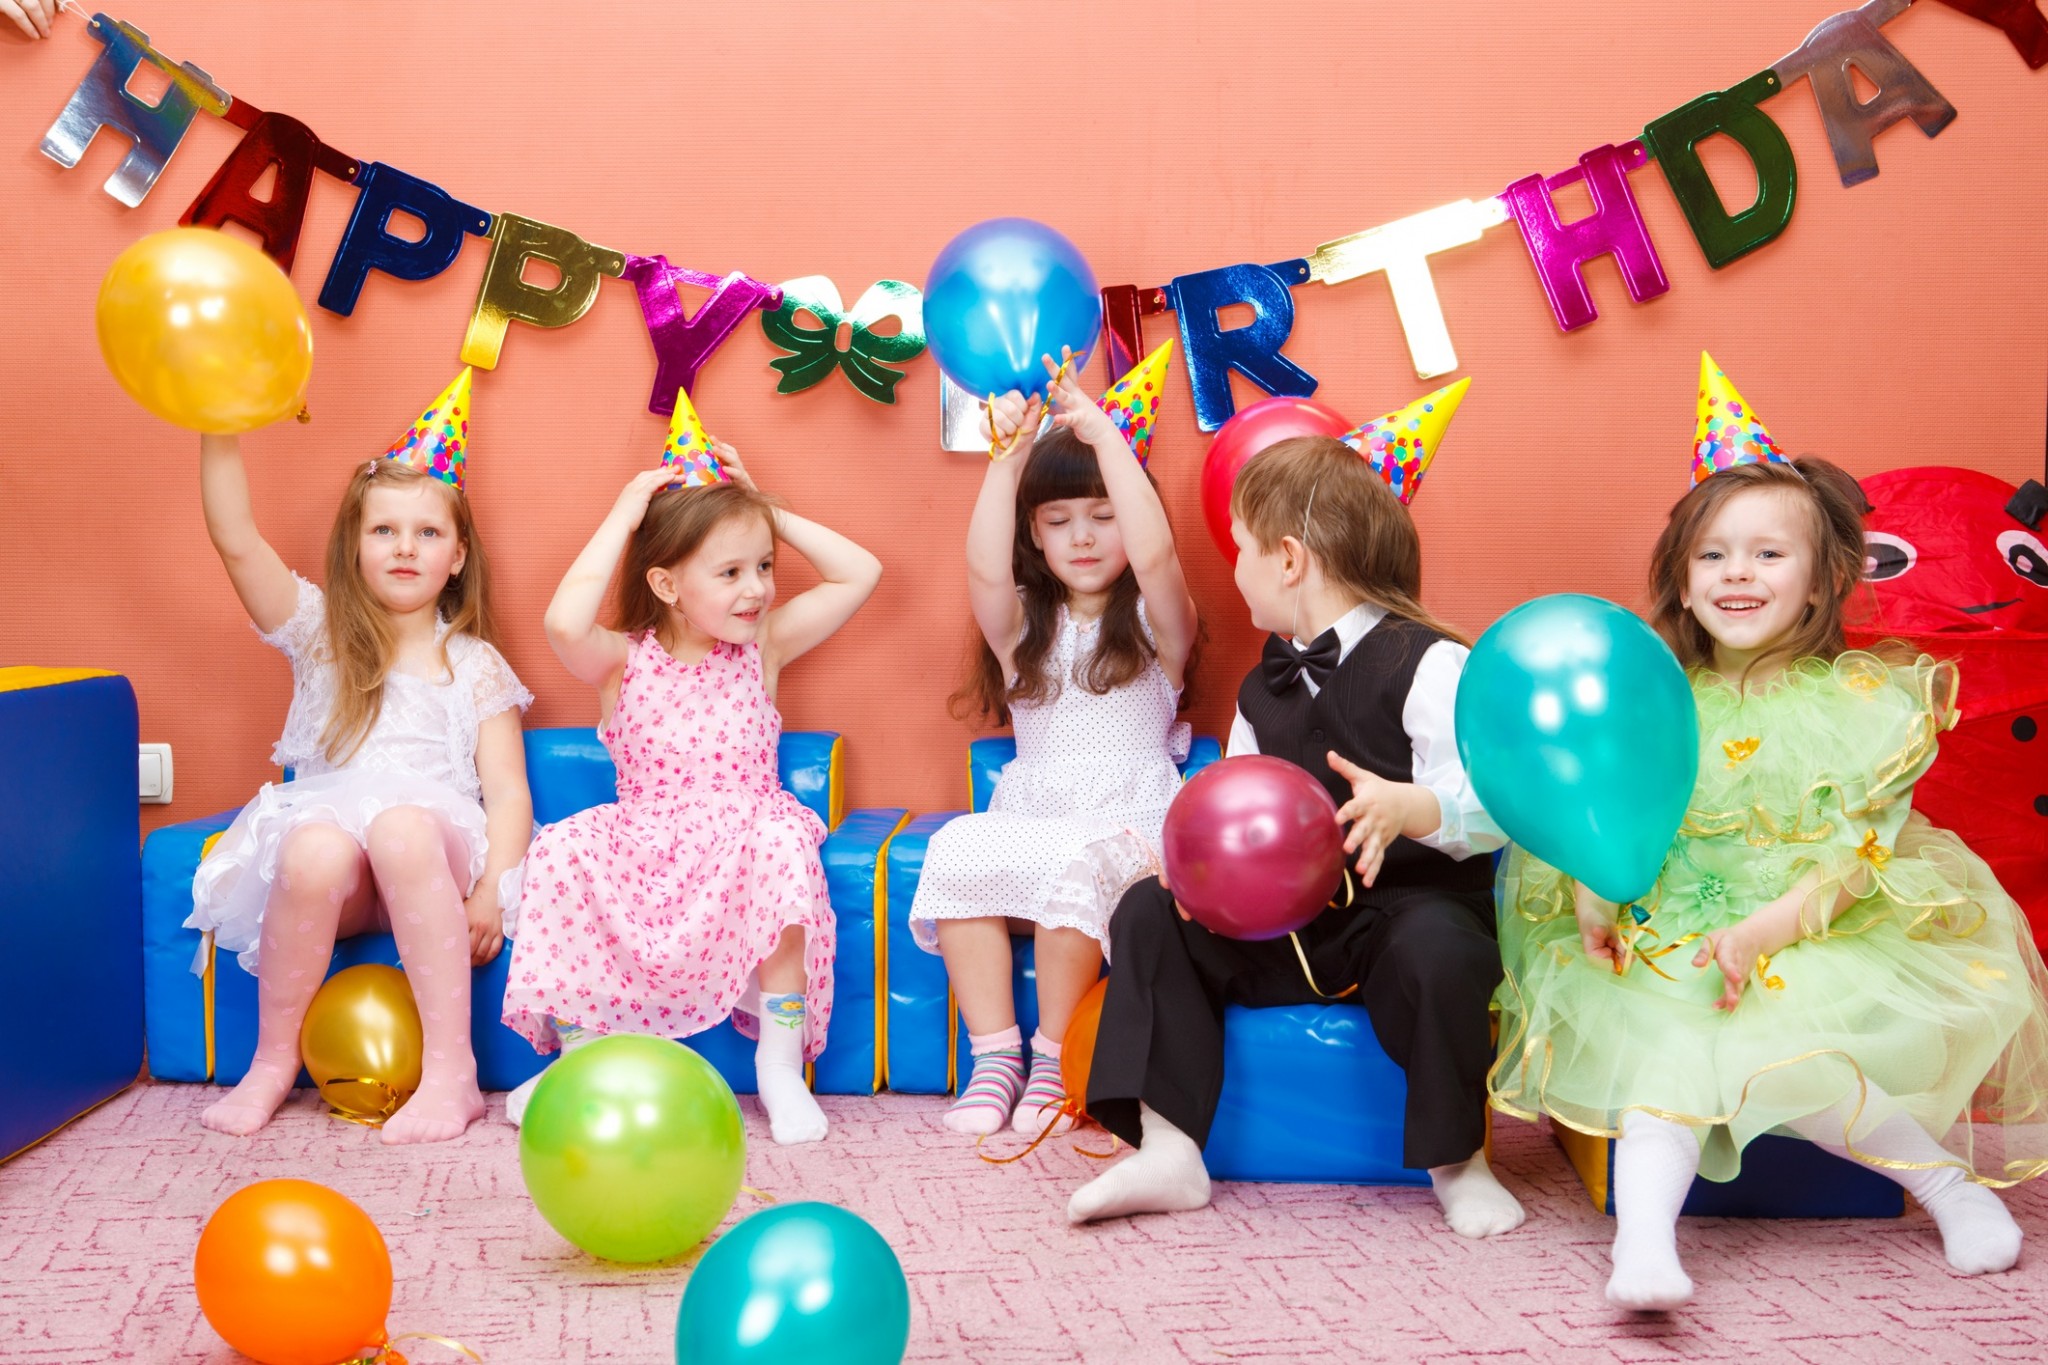 Entertainers for Children’s Parties in Bedfordshire